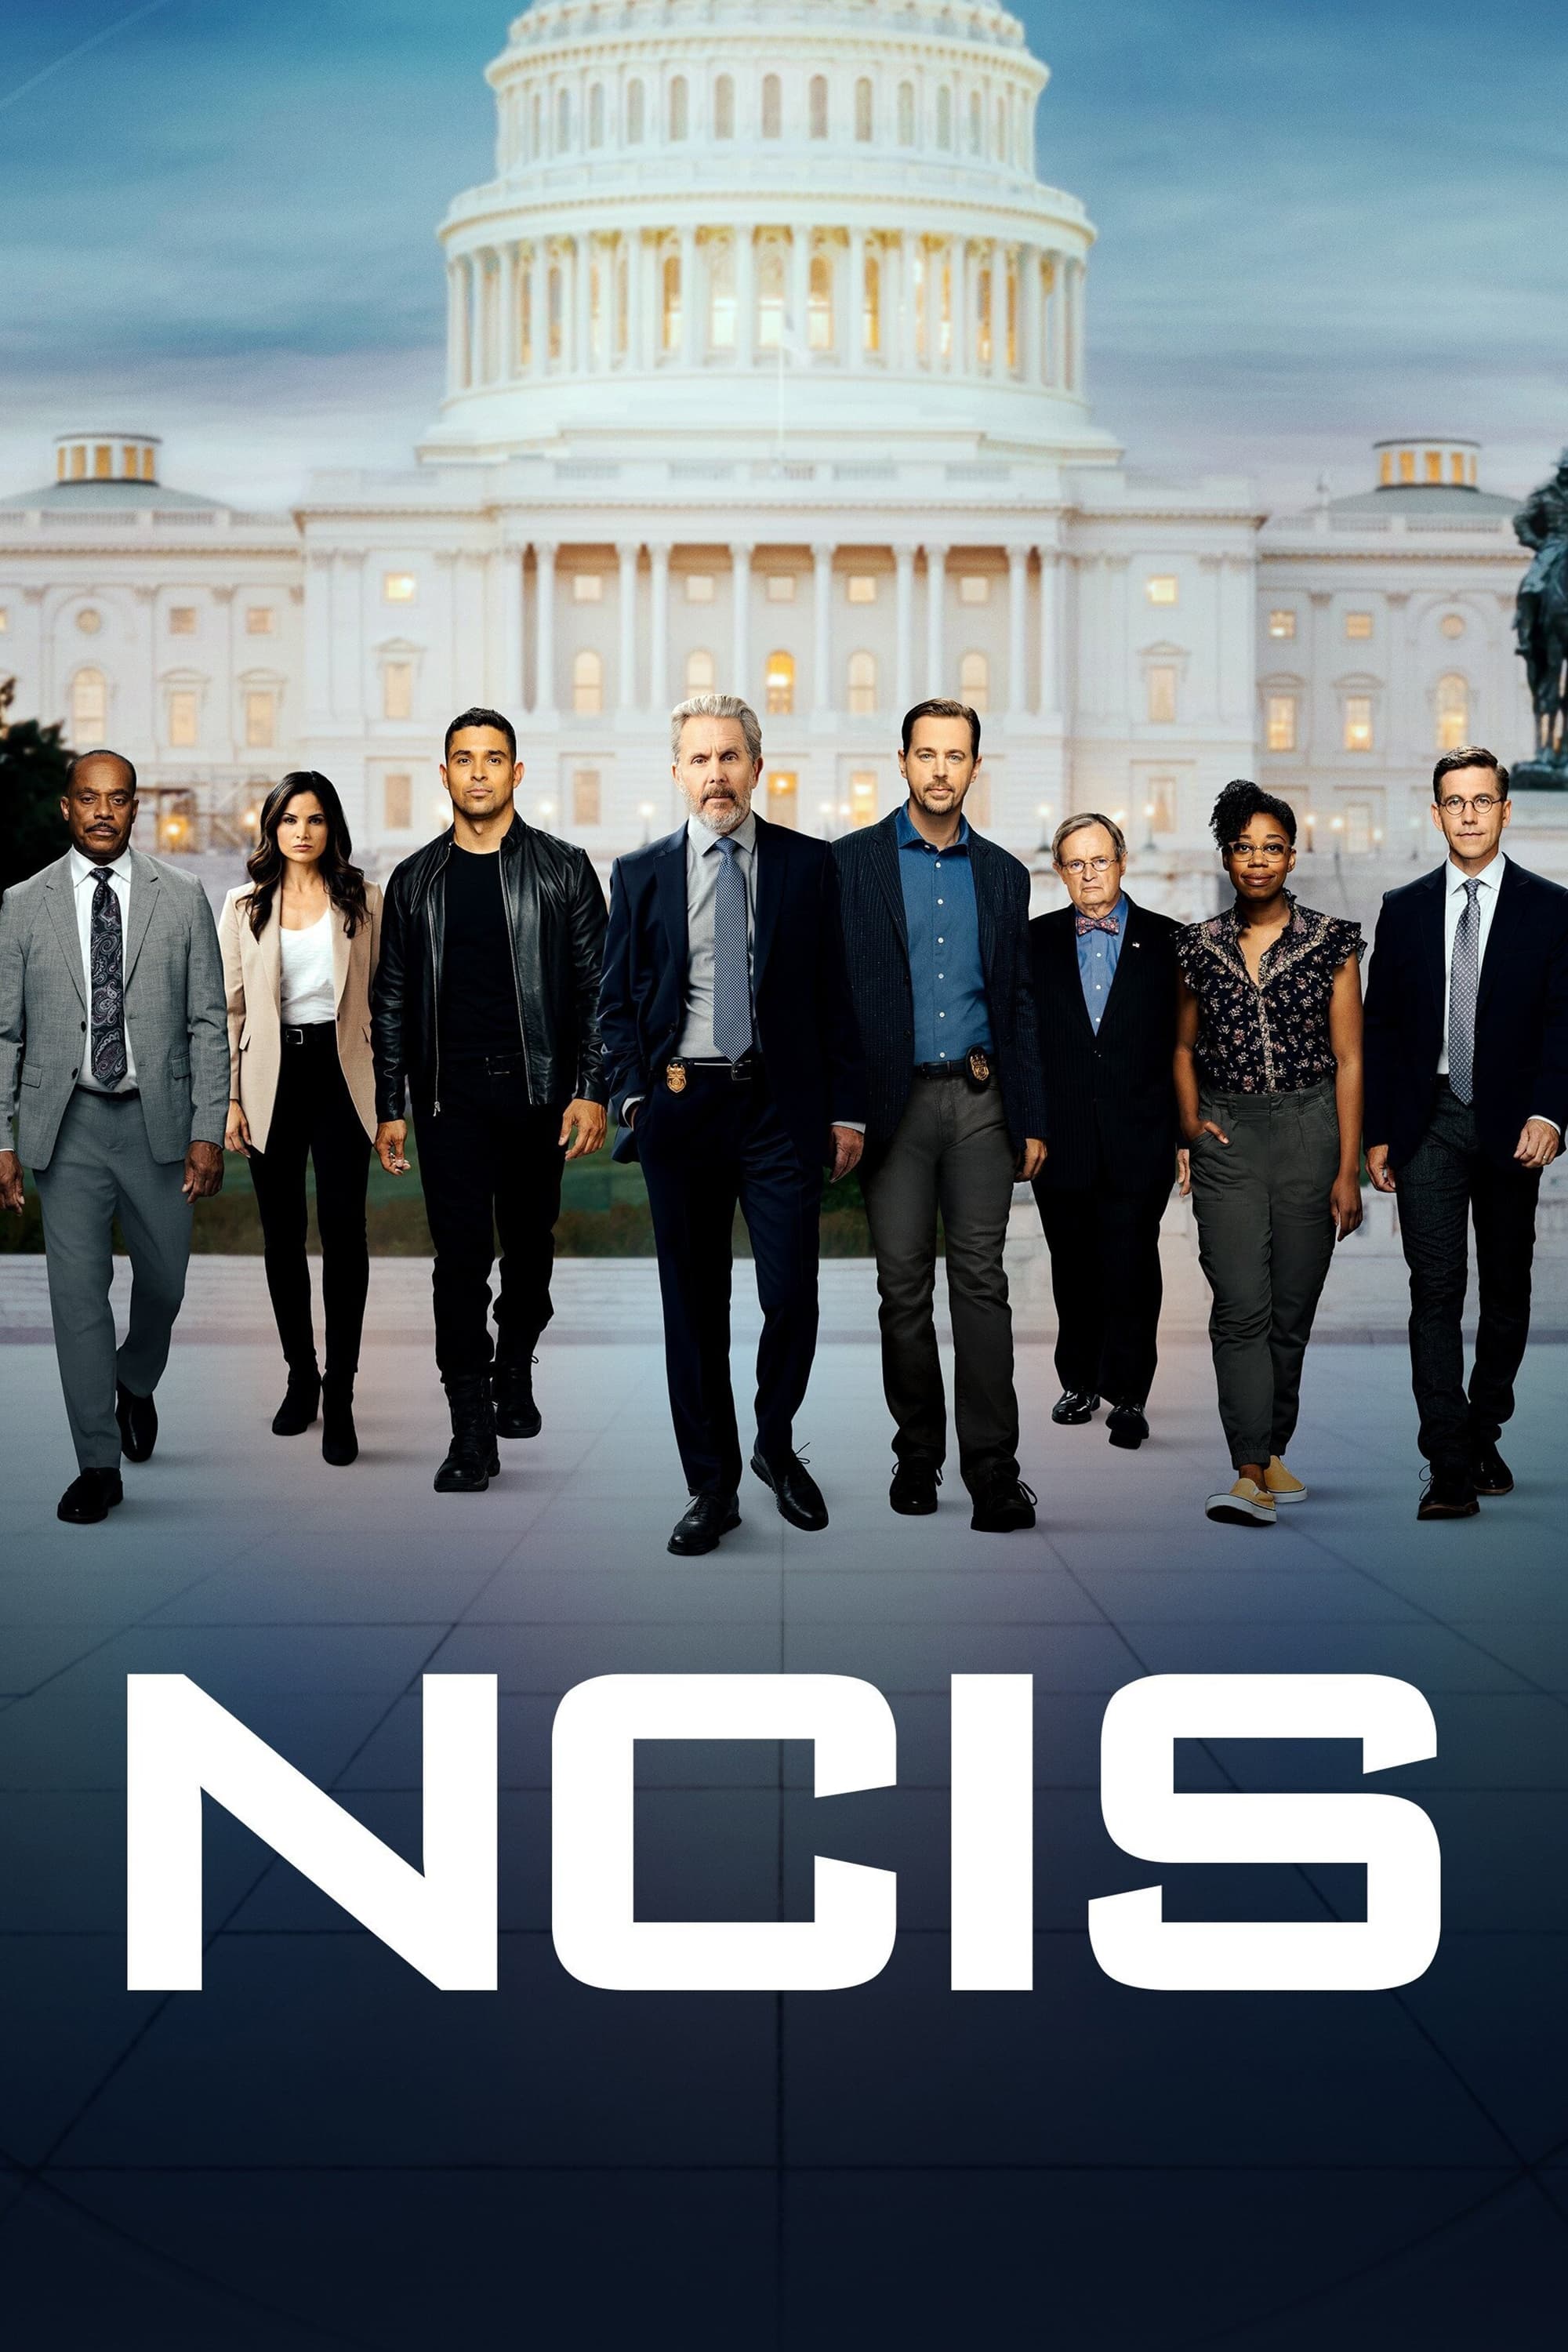 NCIS TV Shows About Marine Corps